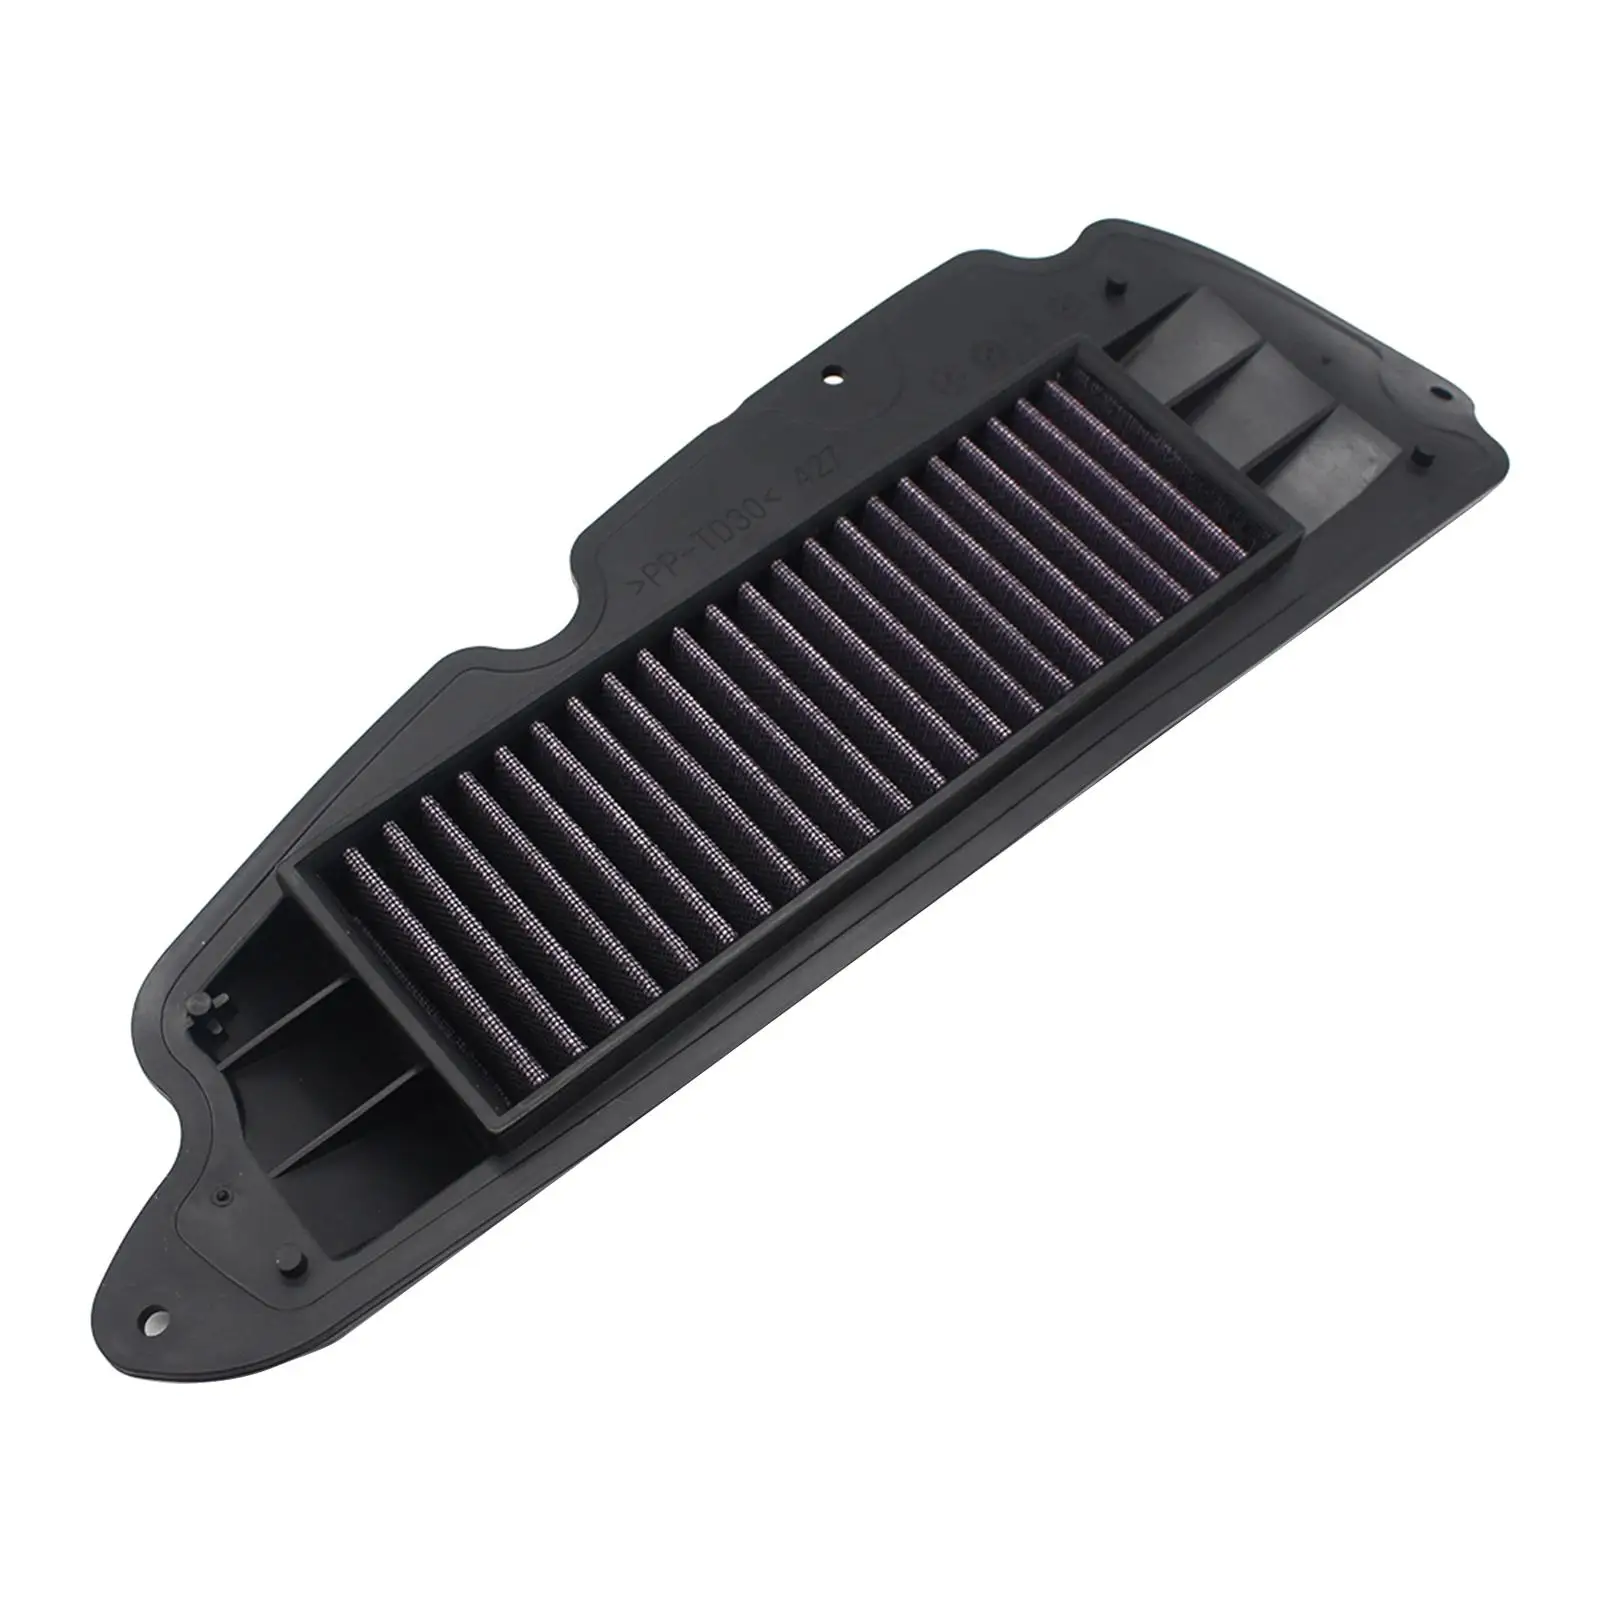  Air Filter Intake Cleaner Assemblies  Replaces  50 21-202 Installation  Parts